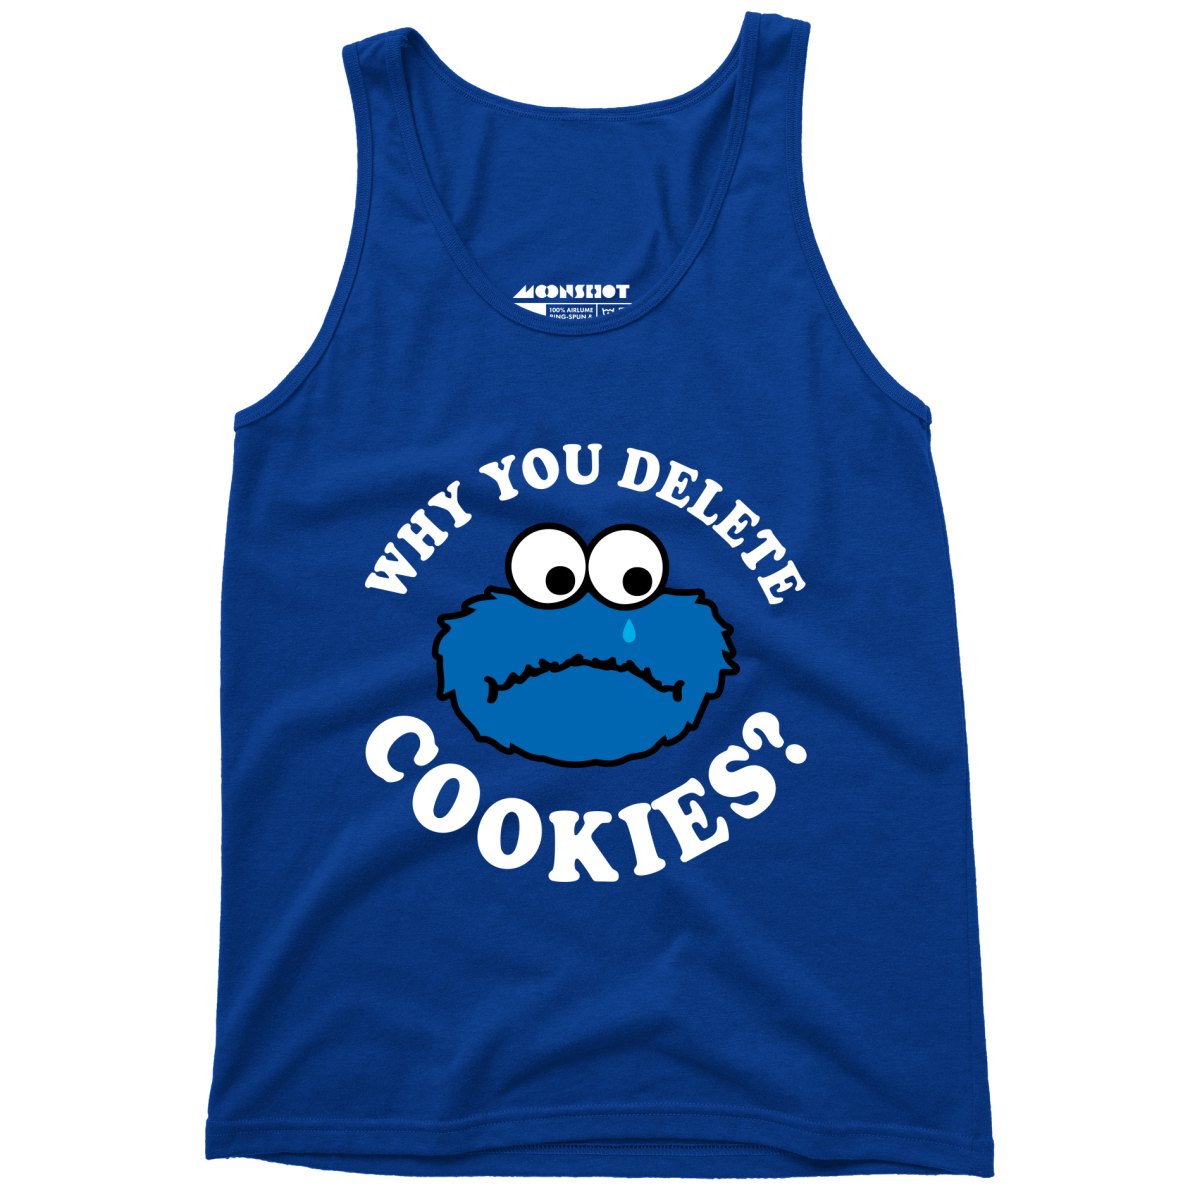 Why You Delete Cookies? - Unisex Tank Top